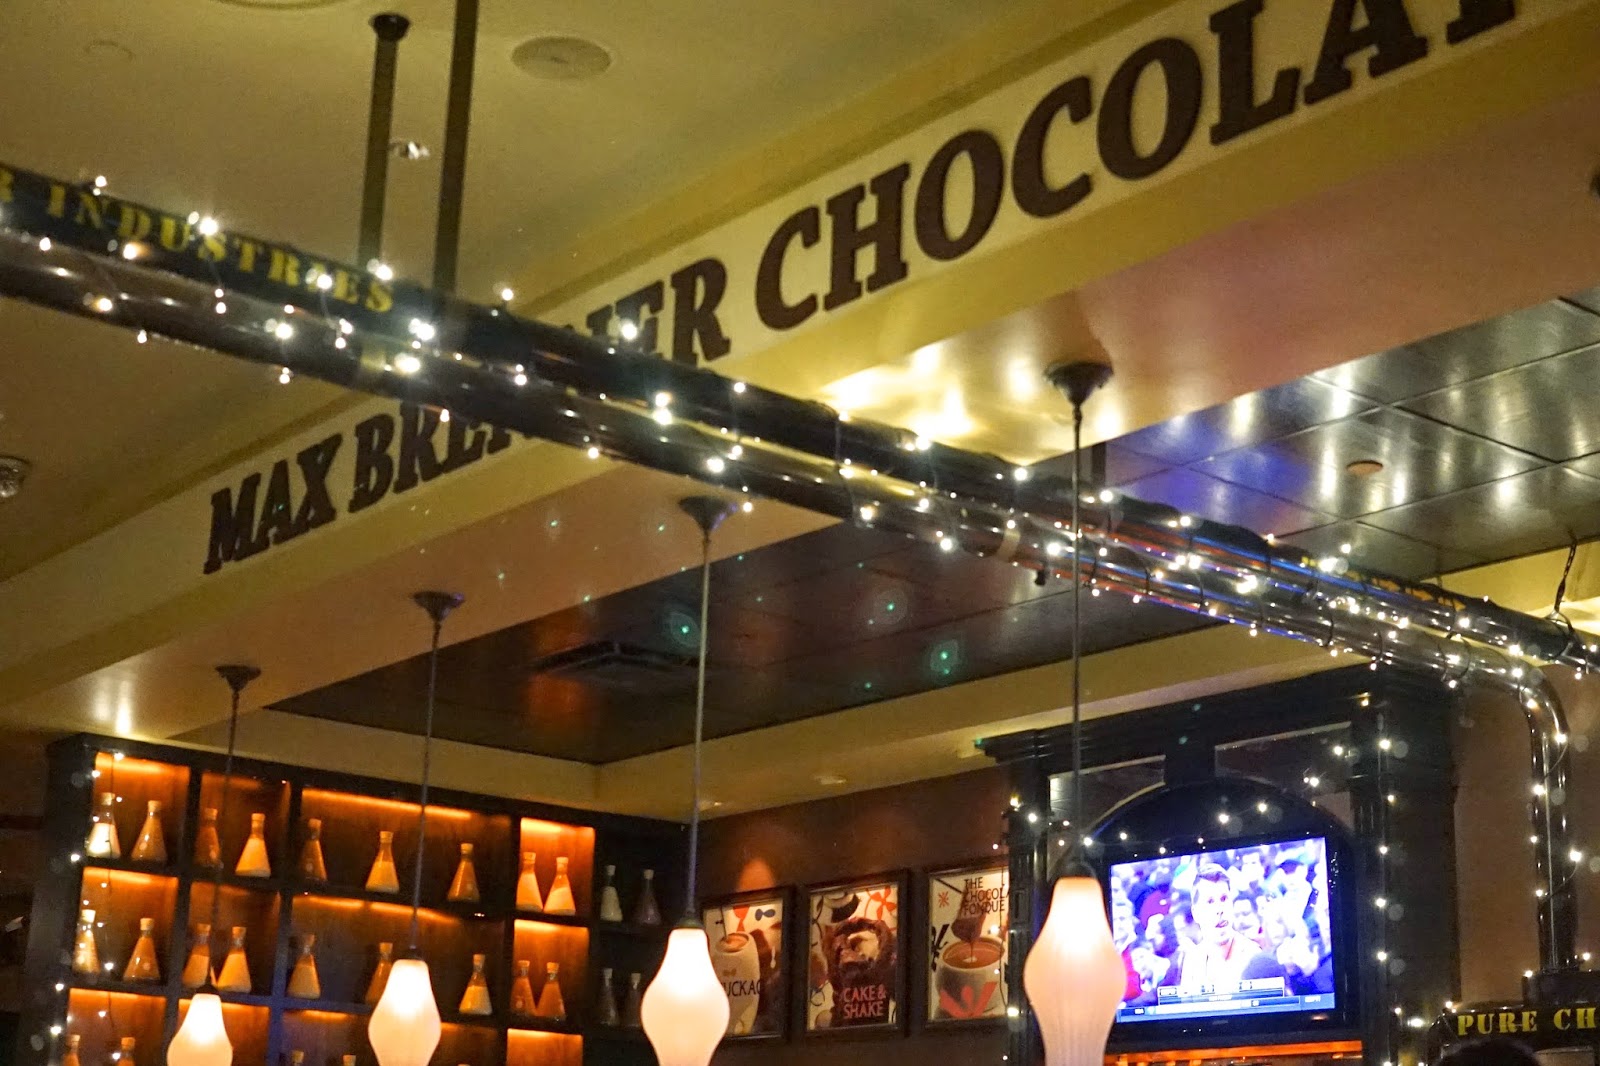 max brenner chocolate